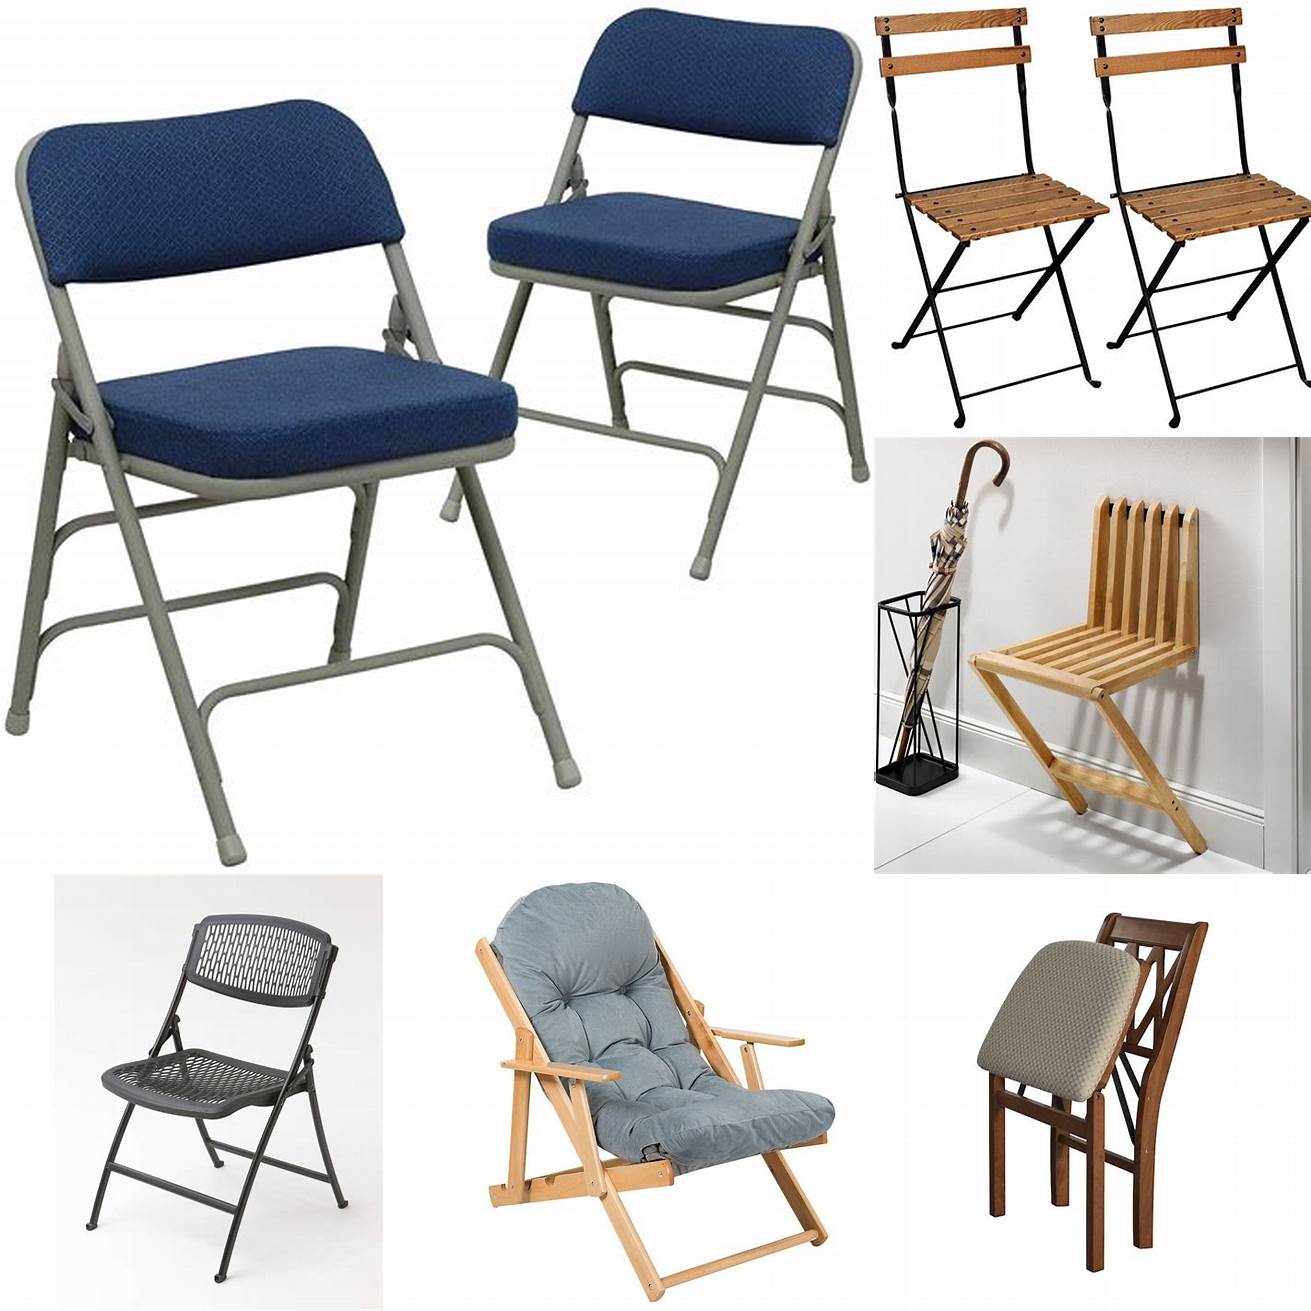 Folding chairs are perfect for small spaces as they can be easily stored away when not in use